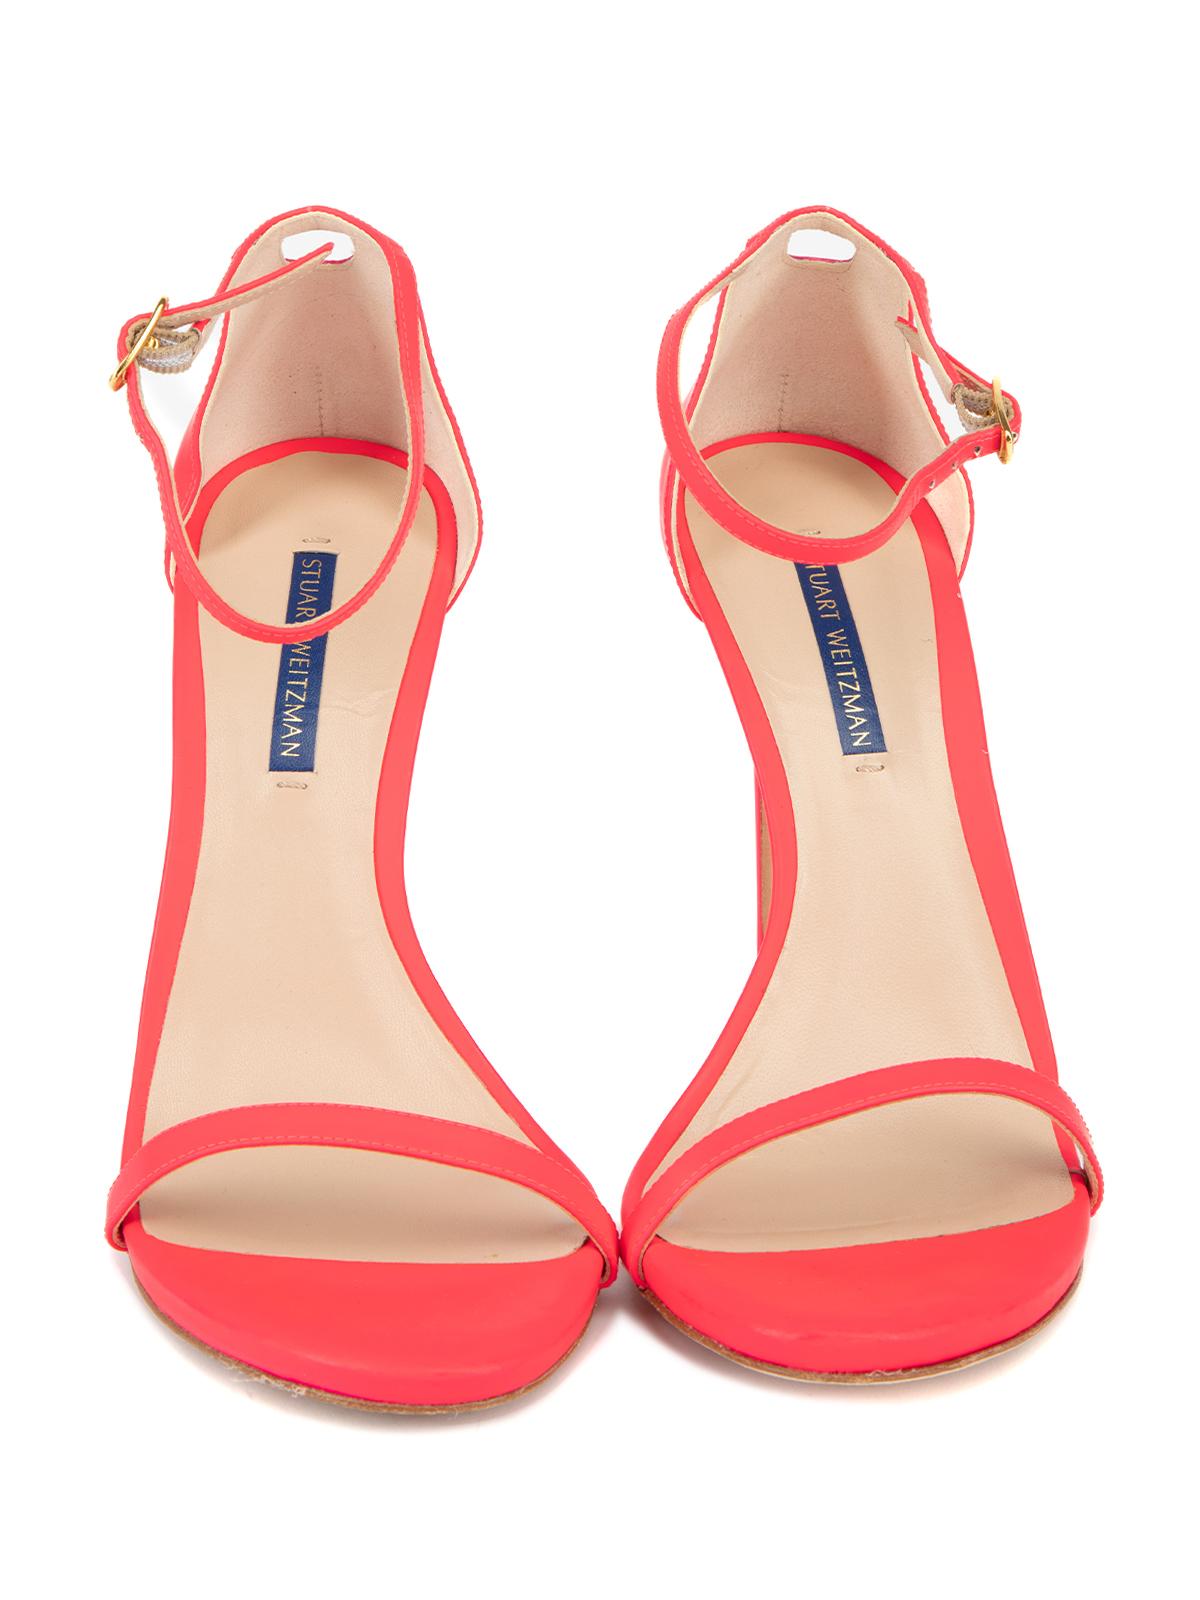 Stuart Weitzman Women's Neon Pink Barely There Ankle Strap Heels In Excellent Condition For Sale In London, GB